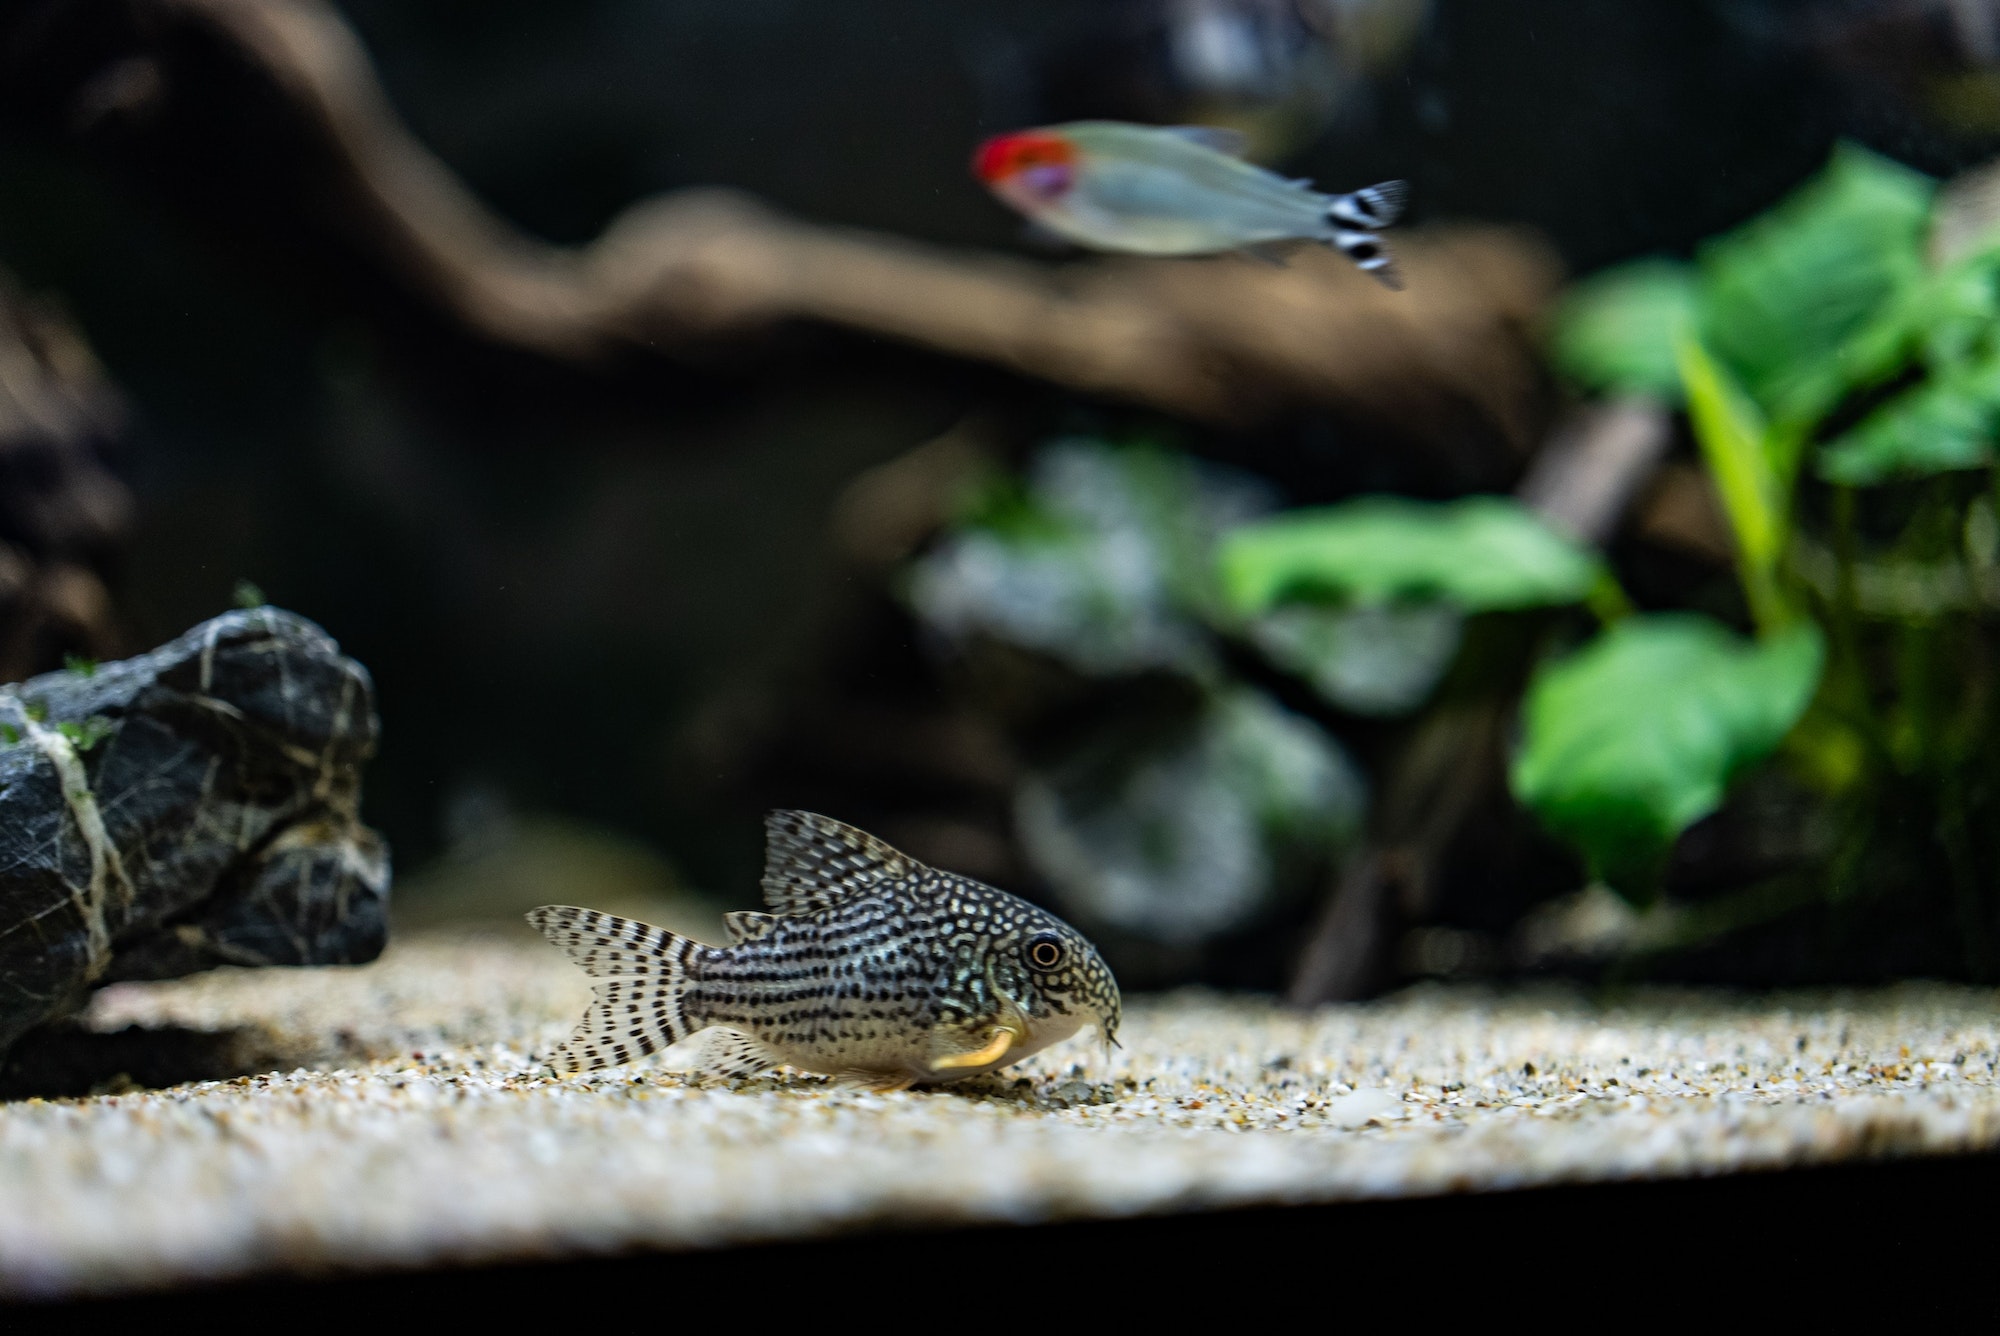 How to Clean Fish Tank Gravel